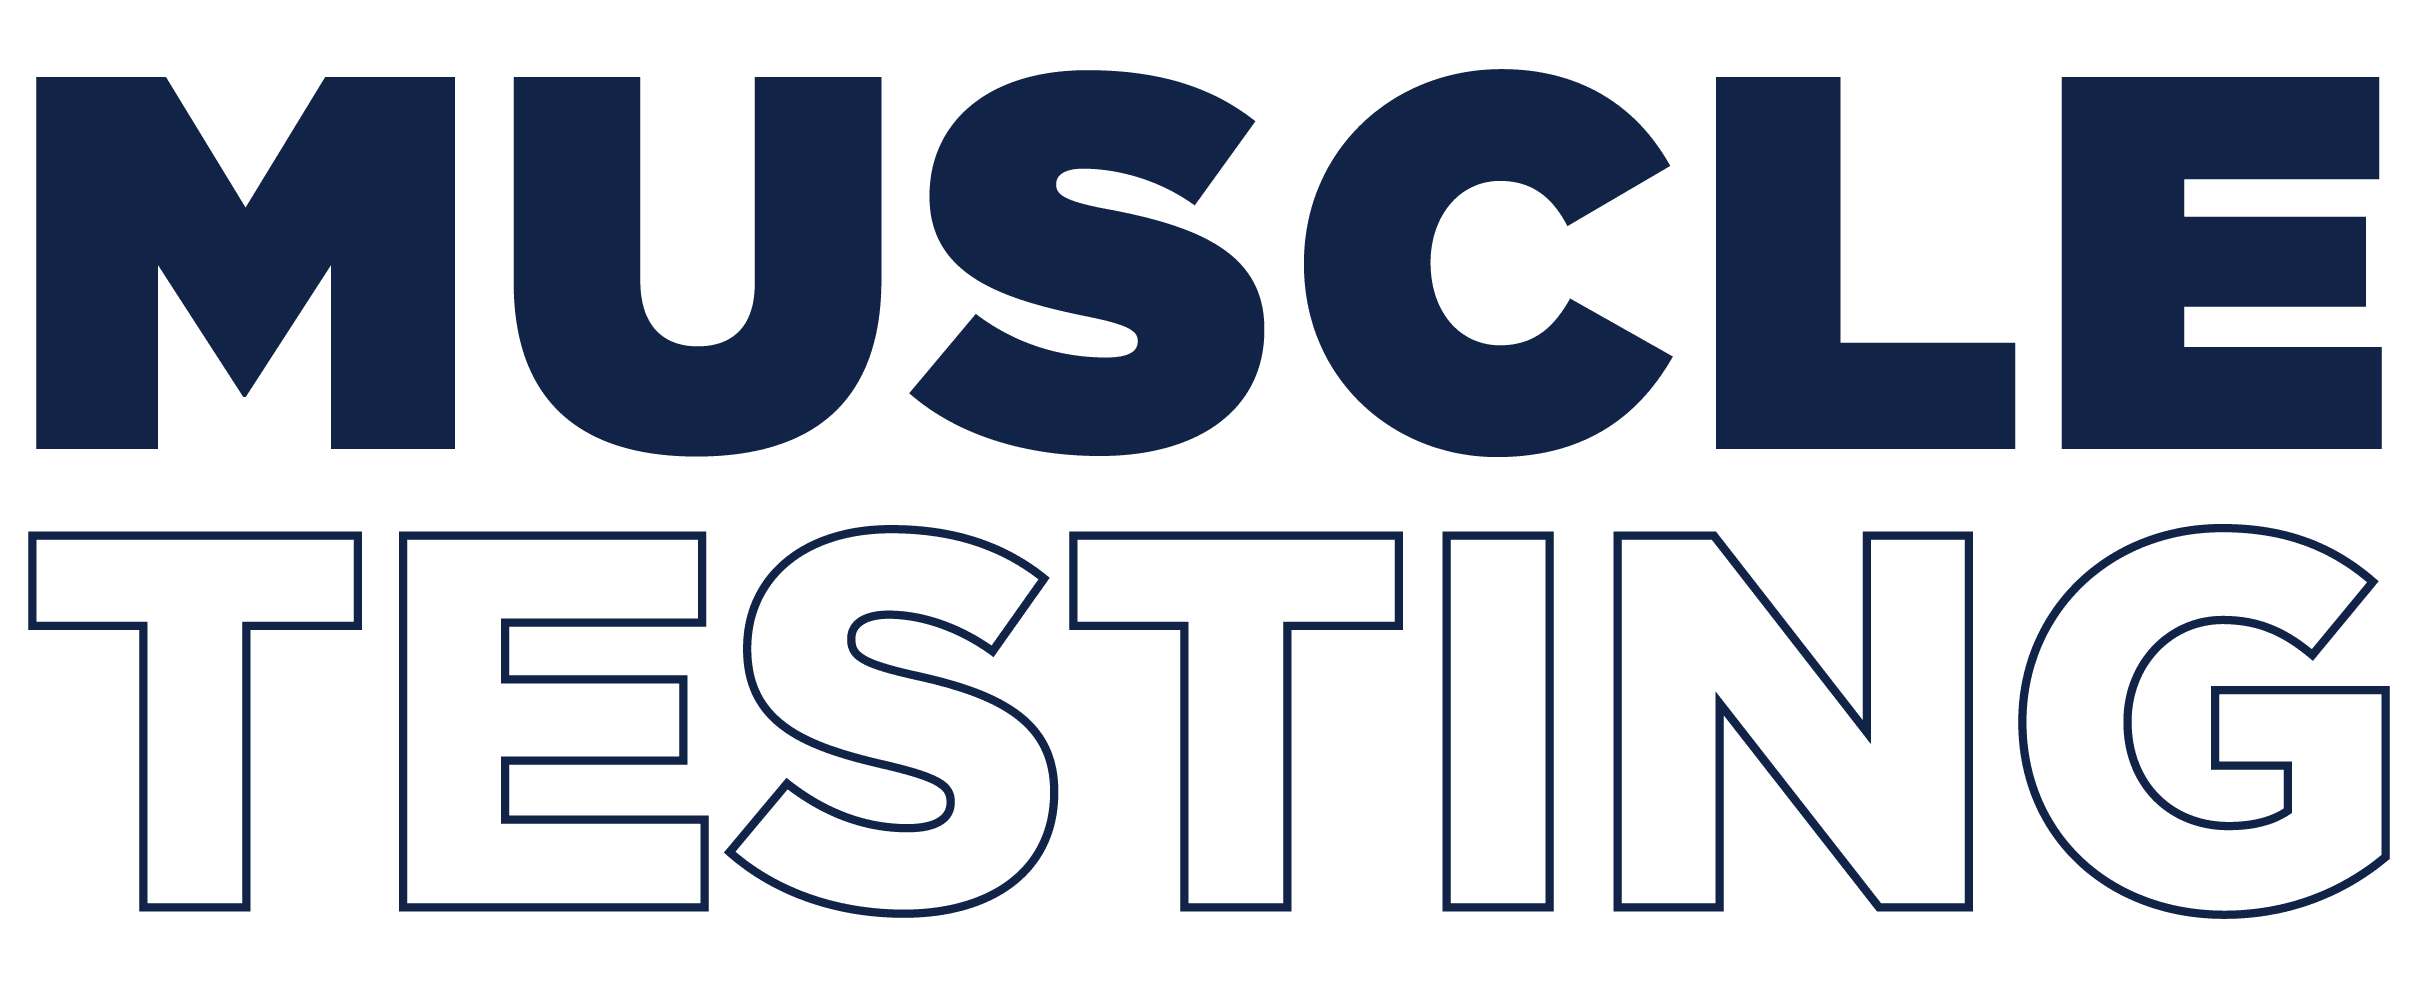 A black background with the words usc and still written in blue.